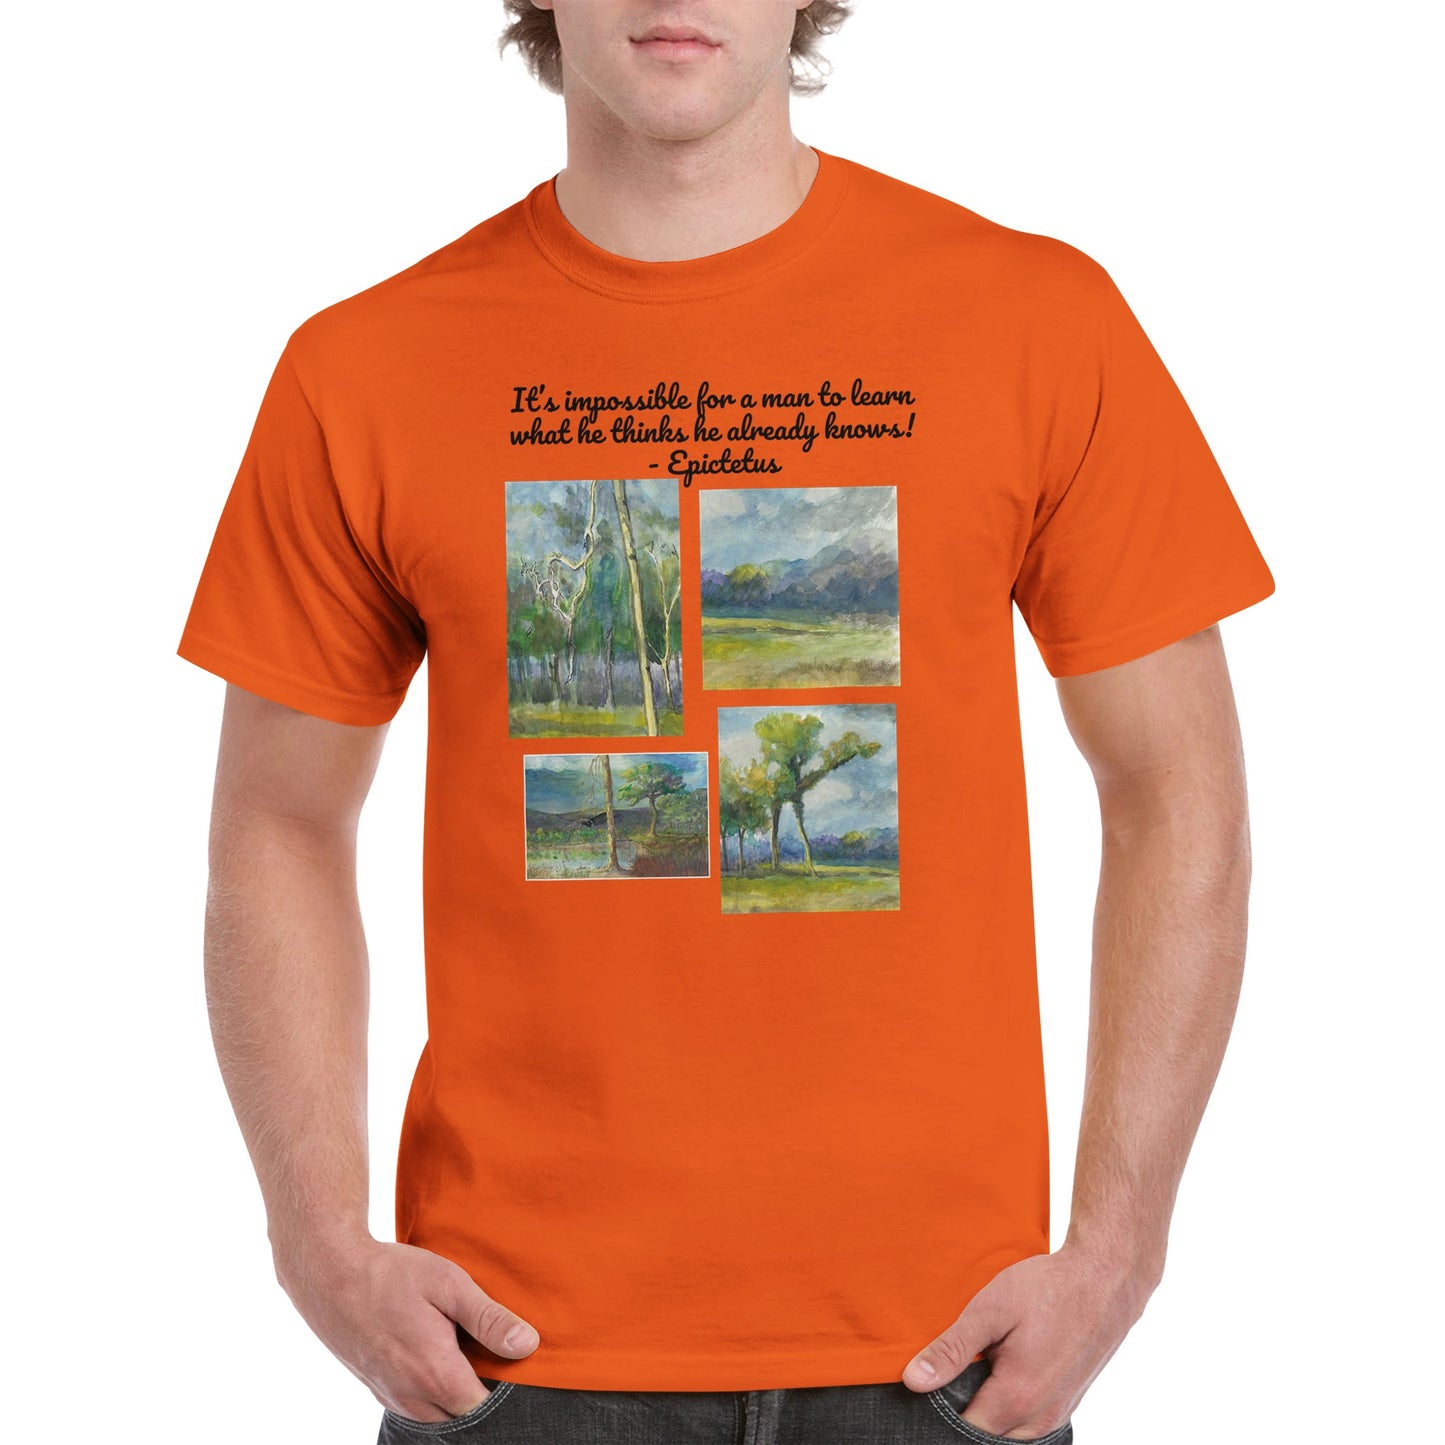 A orange heavyweight Unisex Crewneck cotton t-shirt with original artwork It’s impossible for a man to learn what he thinks he already knows! on the front from WhatYa Say Apparel worn by blonde-haired male front view.